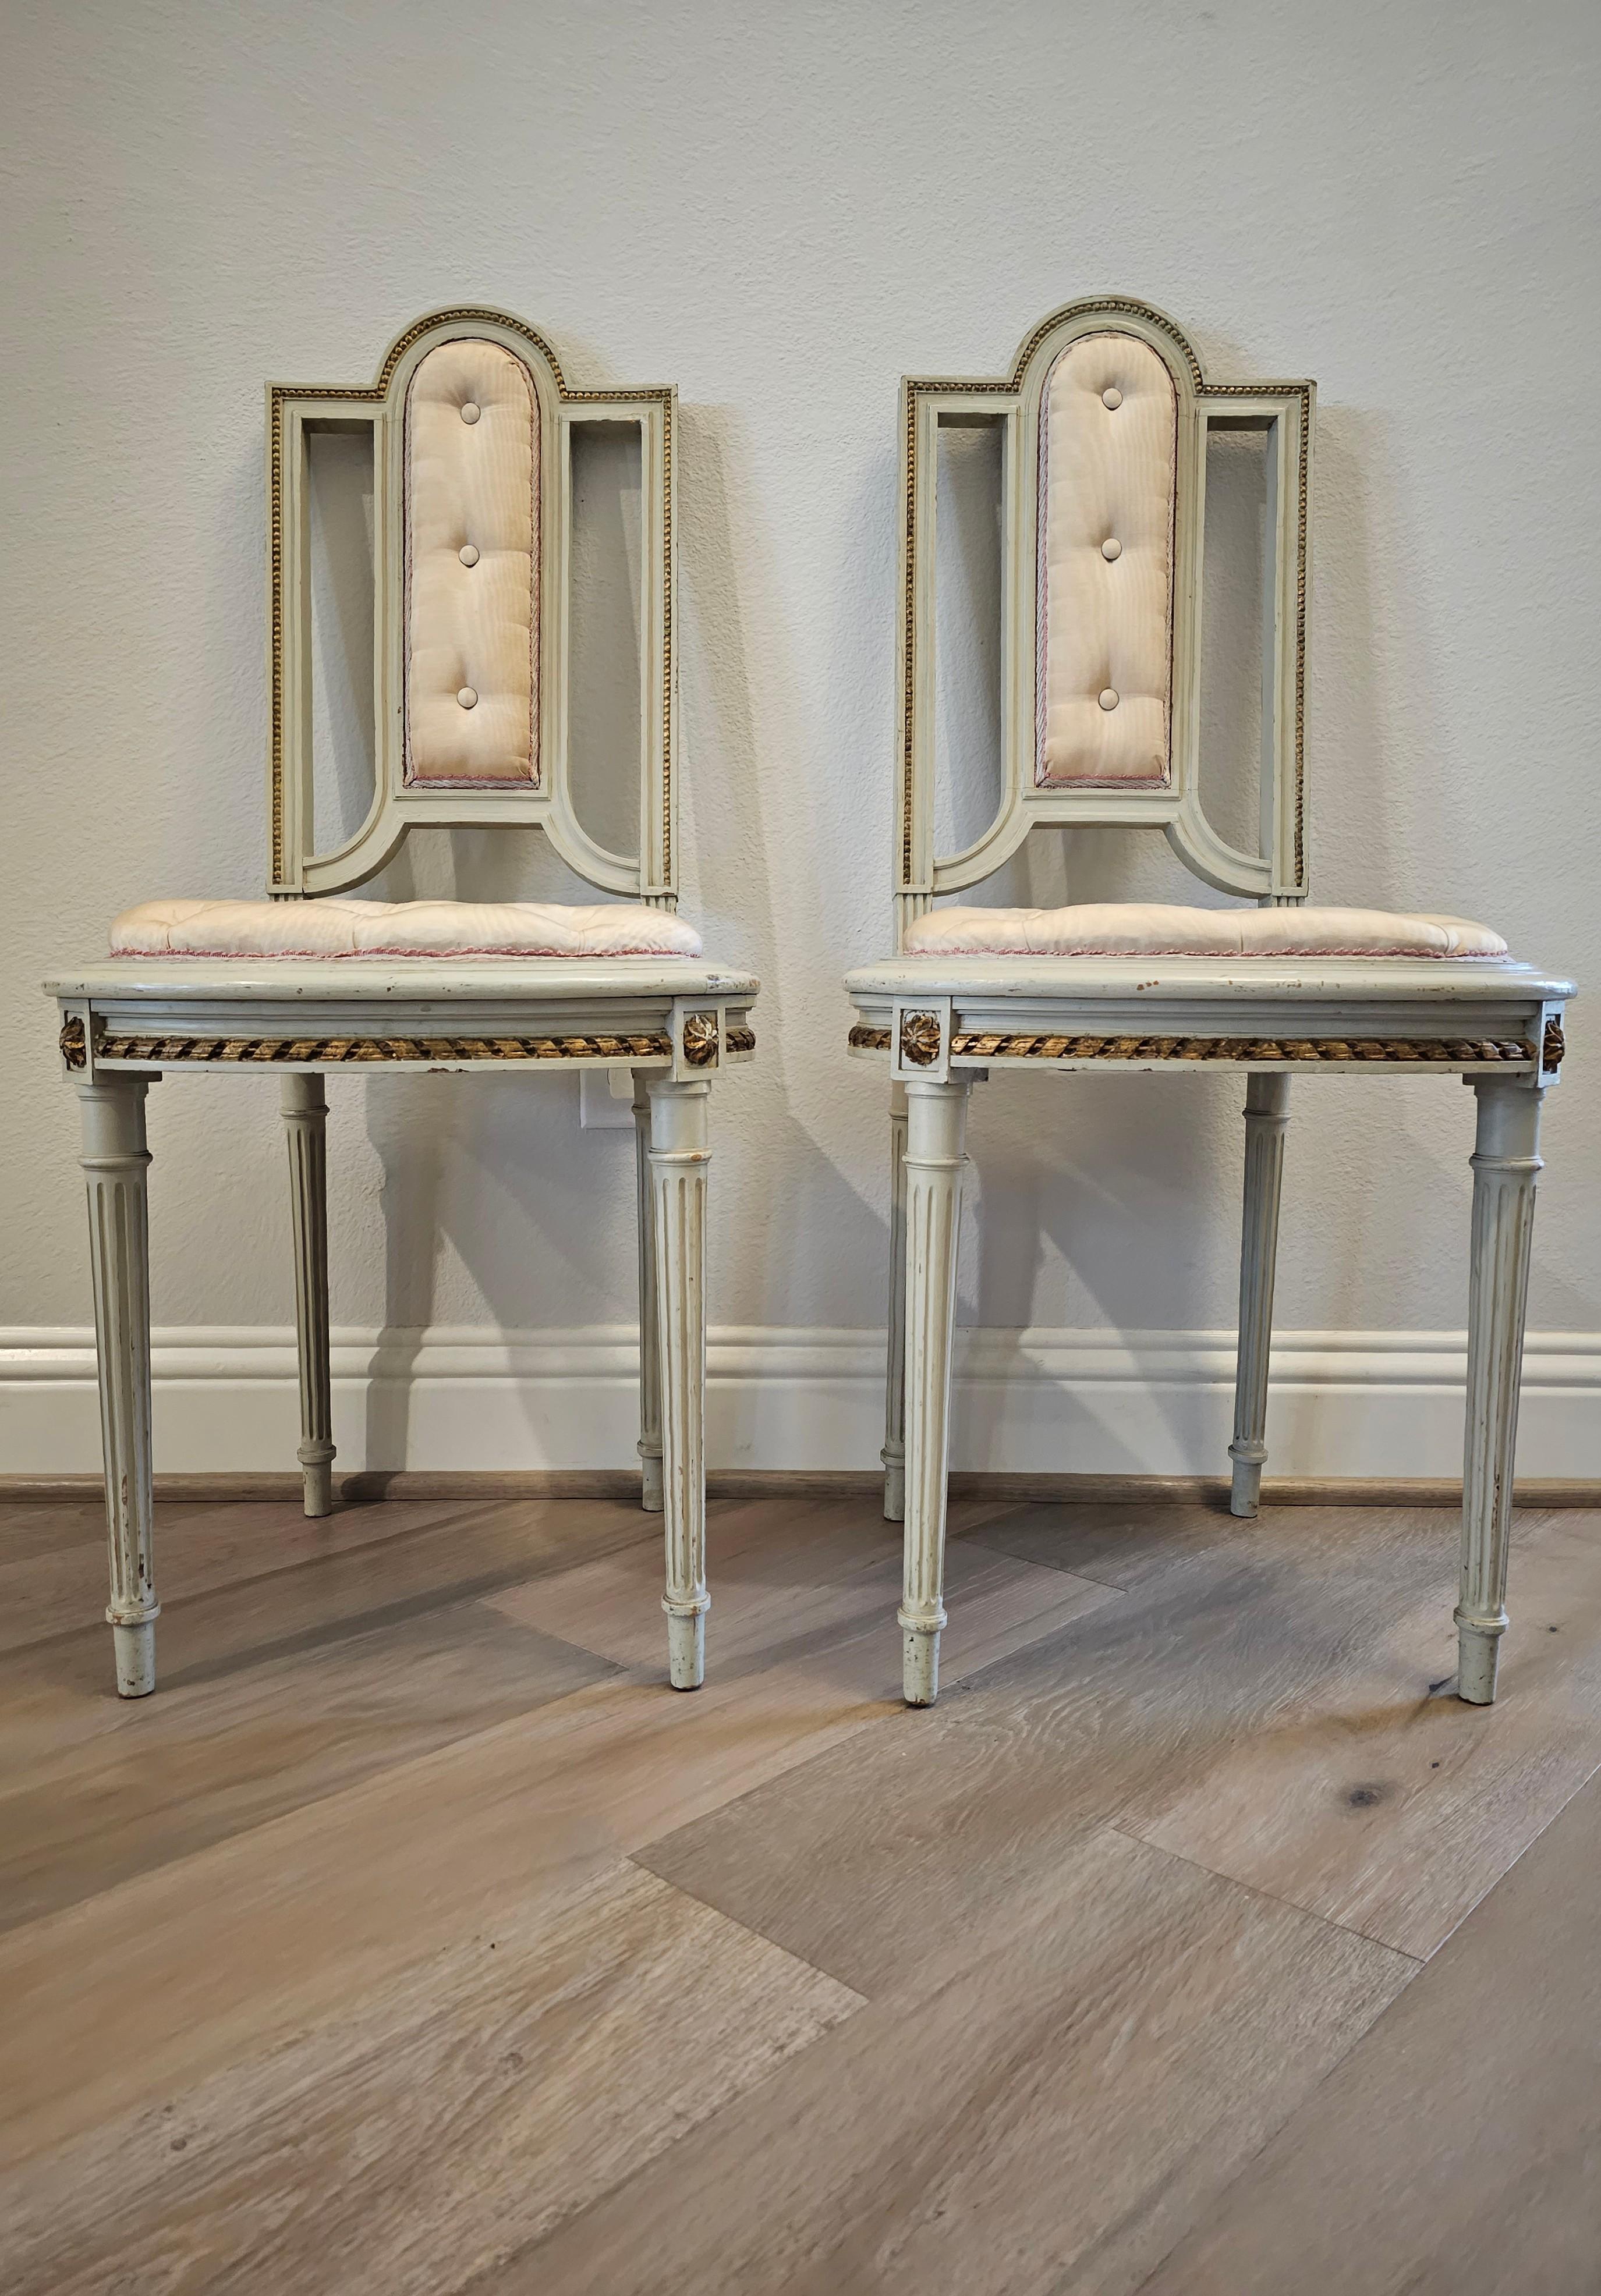 An elegant pair of petite French Belle Époque period (1871-1914) Louis XVI style parcel gilt painted chairs.

Hand-crafted in France in the late 19th / early 20th century, executed in luxurious Louis 15th style, featuring a solid wood frame carved